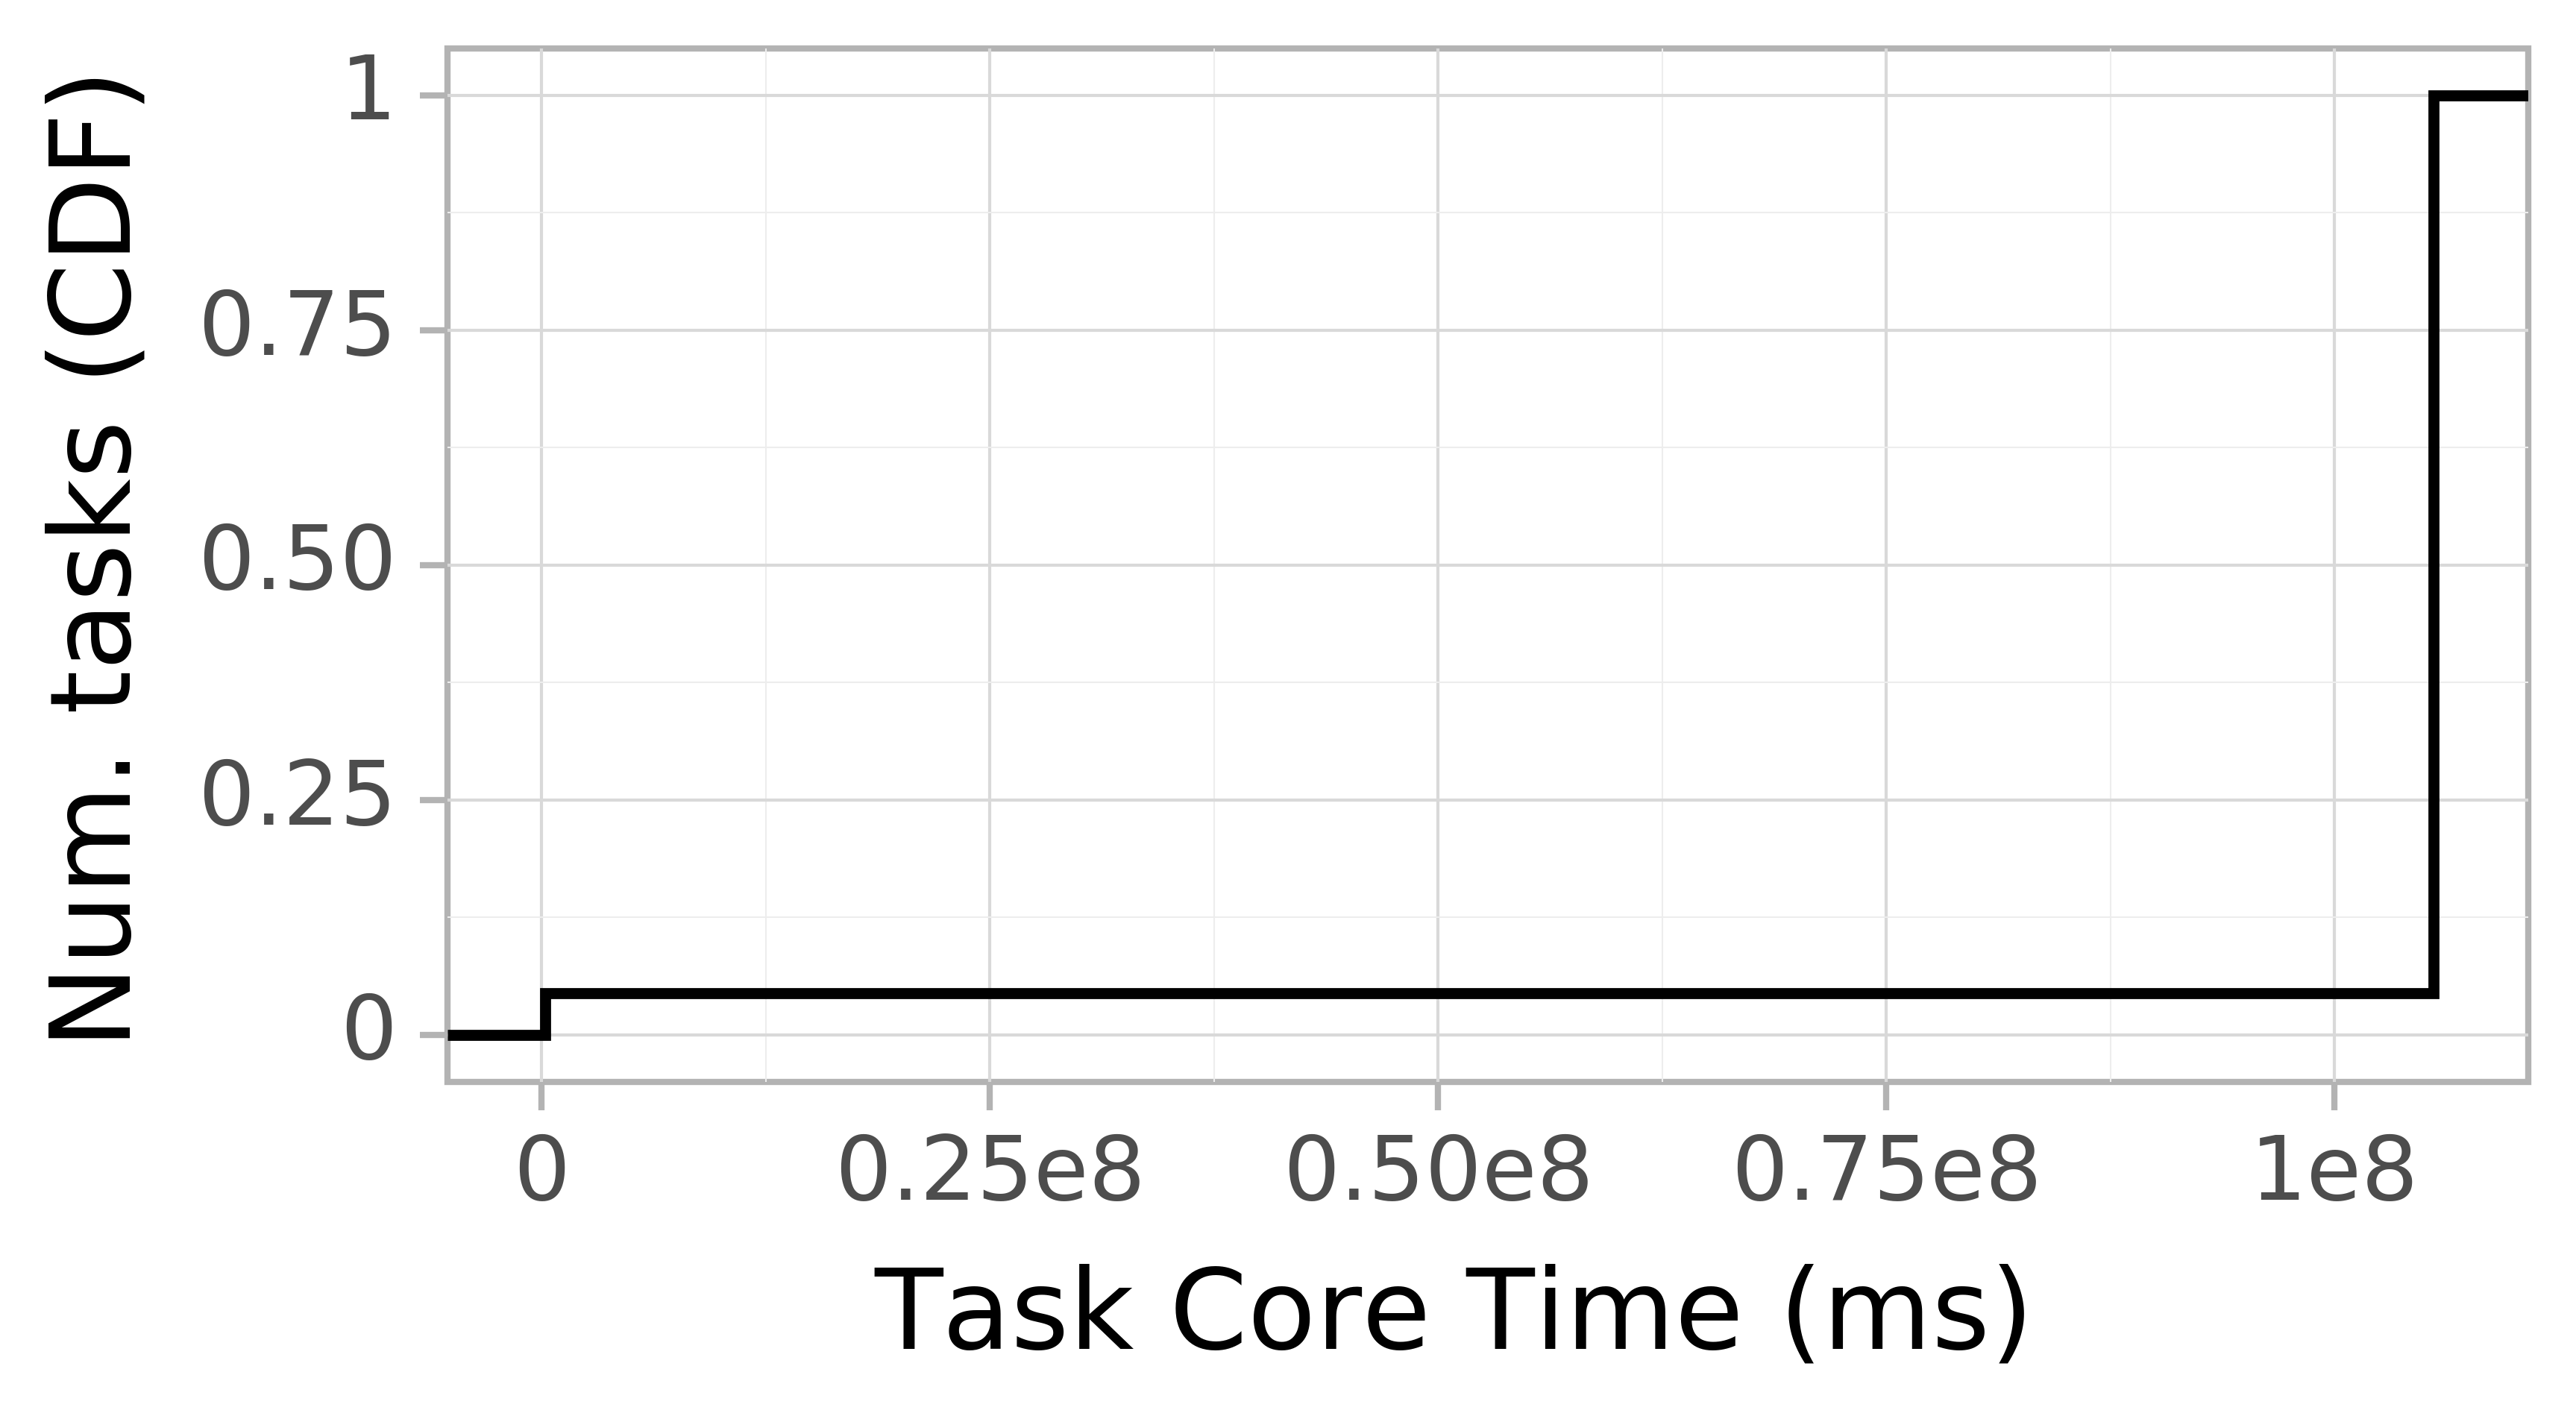 task resource time CDF graph for the Pegasus_P2 trace.